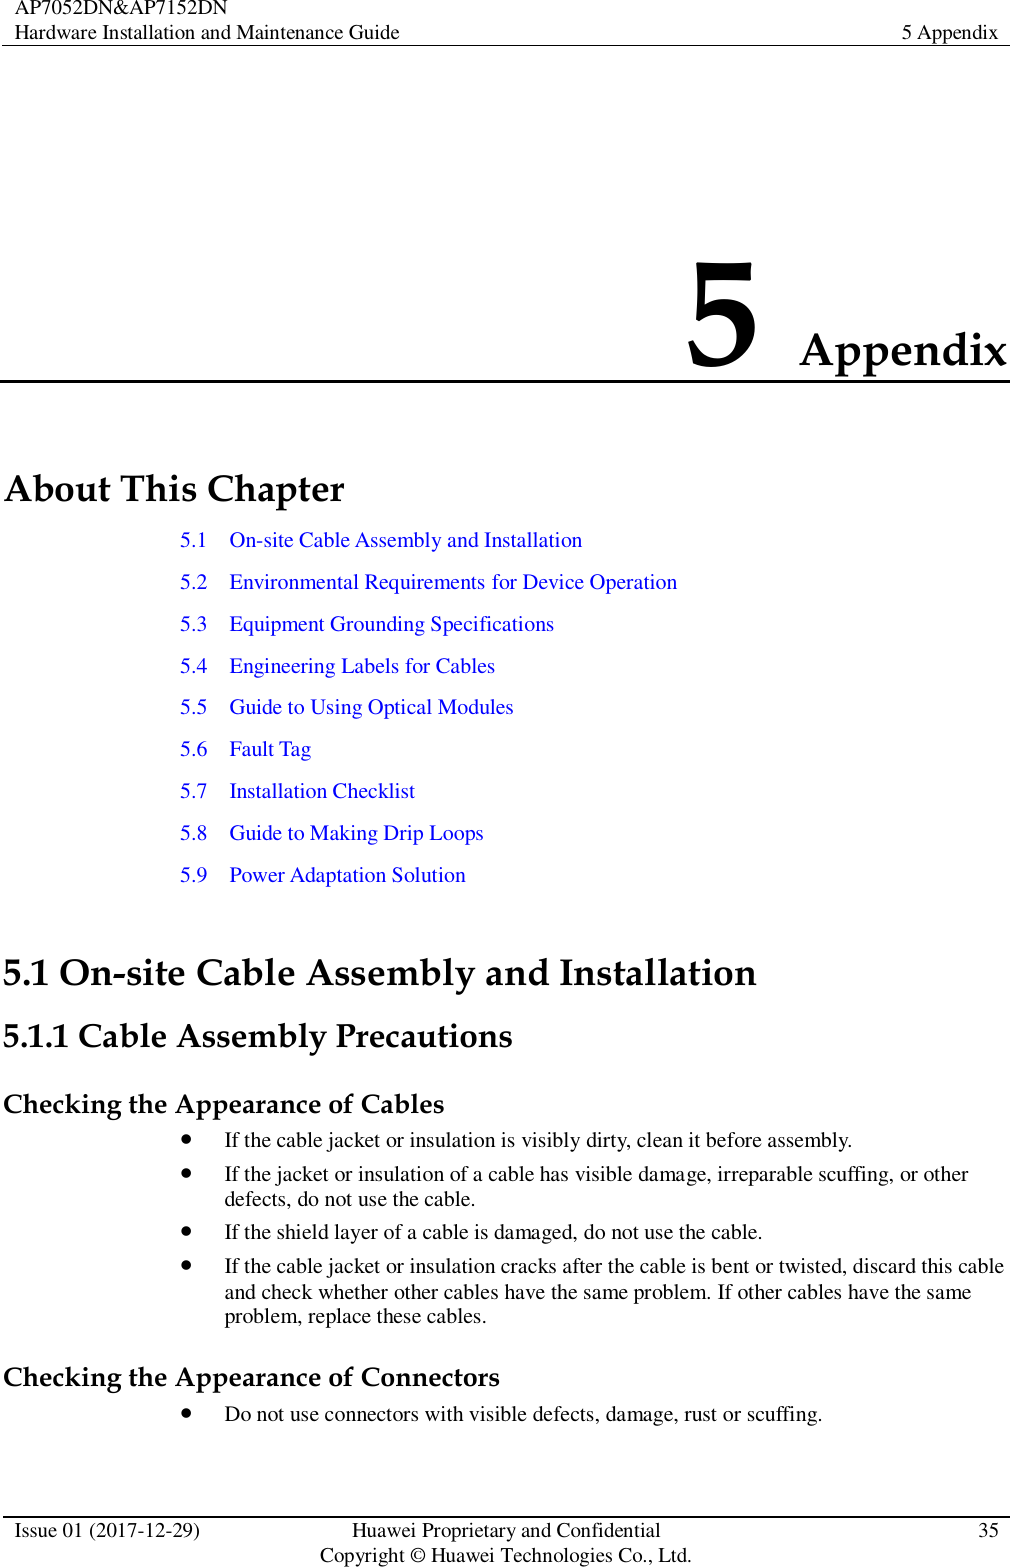 AP7052DN&amp;AP7152DN Hardware Installation and Maintenance Guide 5 Appendix  Issue 01 (2017-12-29) Huawei Proprietary and Confidential                                     Copyright © Huawei Technologies Co., Ltd. 35  5 Appendix About This Chapter 5.1    On-site Cable Assembly and Installation 5.2    Environmental Requirements for Device Operation 5.3    Equipment Grounding Specifications 5.4    Engineering Labels for Cables 5.5    Guide to Using Optical Modules 5.6    Fault Tag 5.7    Installation Checklist 5.8    Guide to Making Drip Loops 5.9    Power Adaptation Solution 5.1 On-site Cable Assembly and Installation 5.1.1 Cable Assembly Precautions Checking the Appearance of Cables  If the cable jacket or insulation is visibly dirty, clean it before assembly.  If the jacket or insulation of a cable has visible damage, irreparable scuffing, or other defects, do not use the cable.  If the shield layer of a cable is damaged, do not use the cable.  If the cable jacket or insulation cracks after the cable is bent or twisted, discard this cable and check whether other cables have the same problem. If other cables have the same problem, replace these cables. Checking the Appearance of Connectors  Do not use connectors with visible defects, damage, rust or scuffing. 